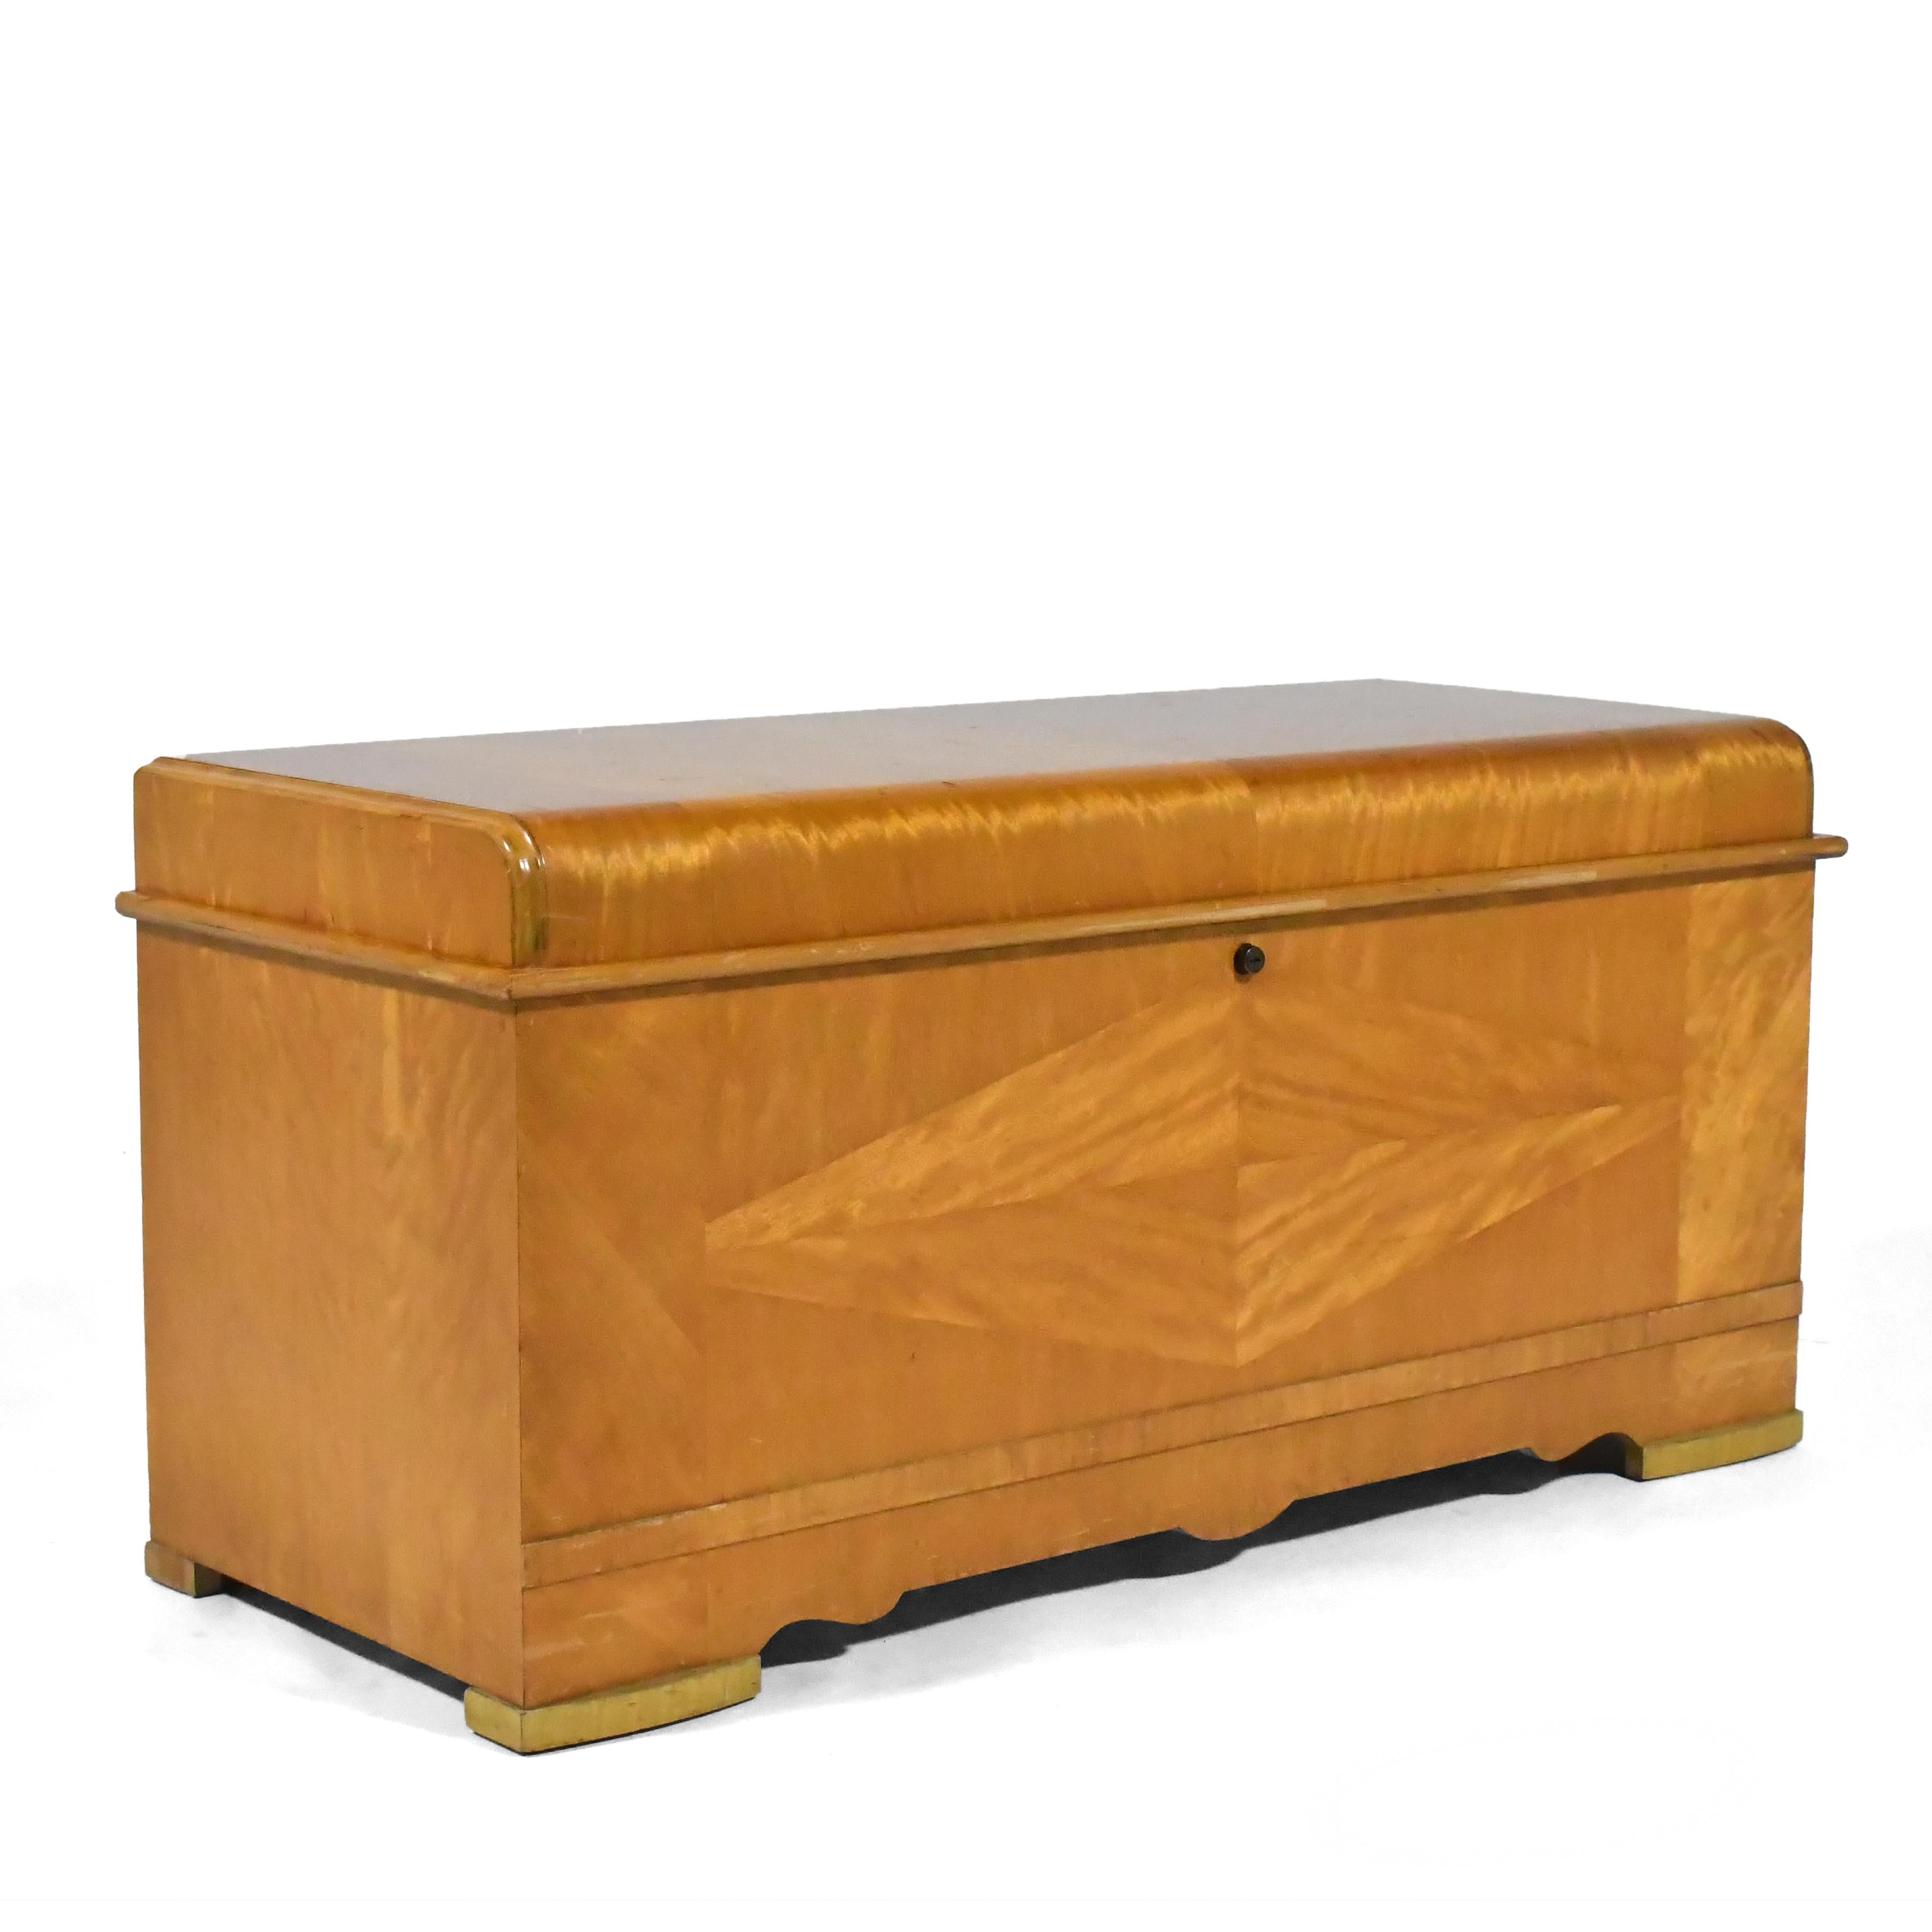 A beautiful place to store blankets or keepsakes, this striking Cavelier red cedar hope chest is expertly crafted and clad in a very active flame mahogany. A generous interior is enhanced with the shallow tray for small items. The waterfall edge and